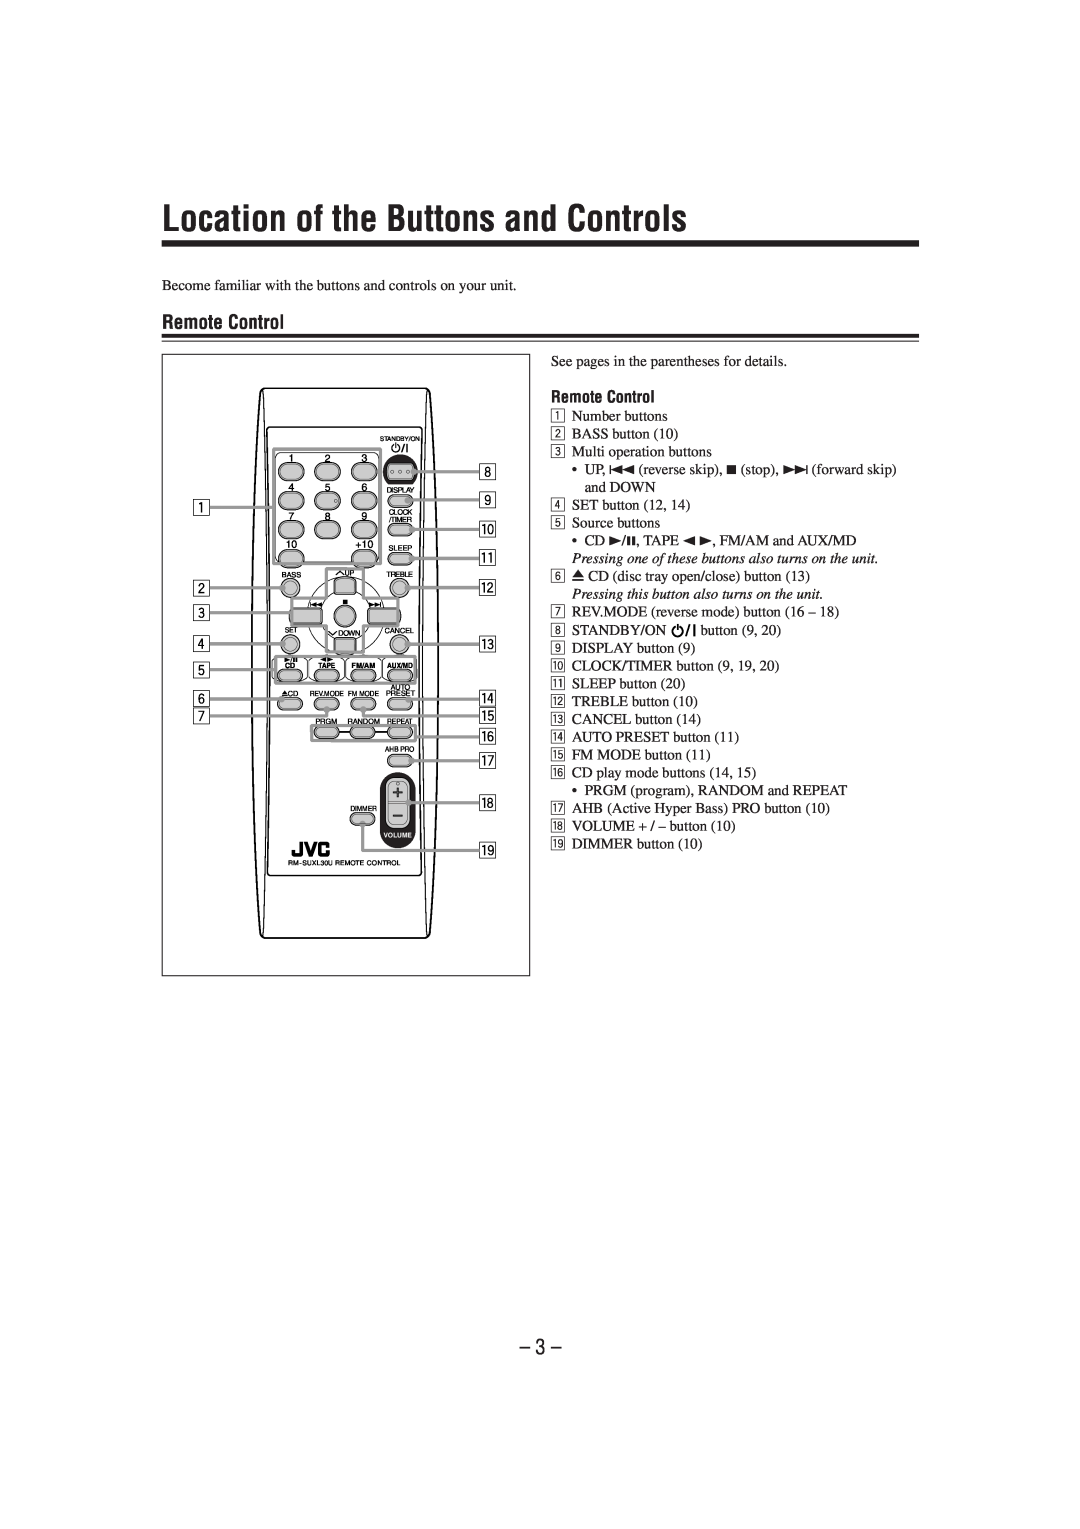 JVC UX-L30 manual Location of the Buttons and Controls, Remote Control, 1 2, 8 9 p q w e r t y u i o 